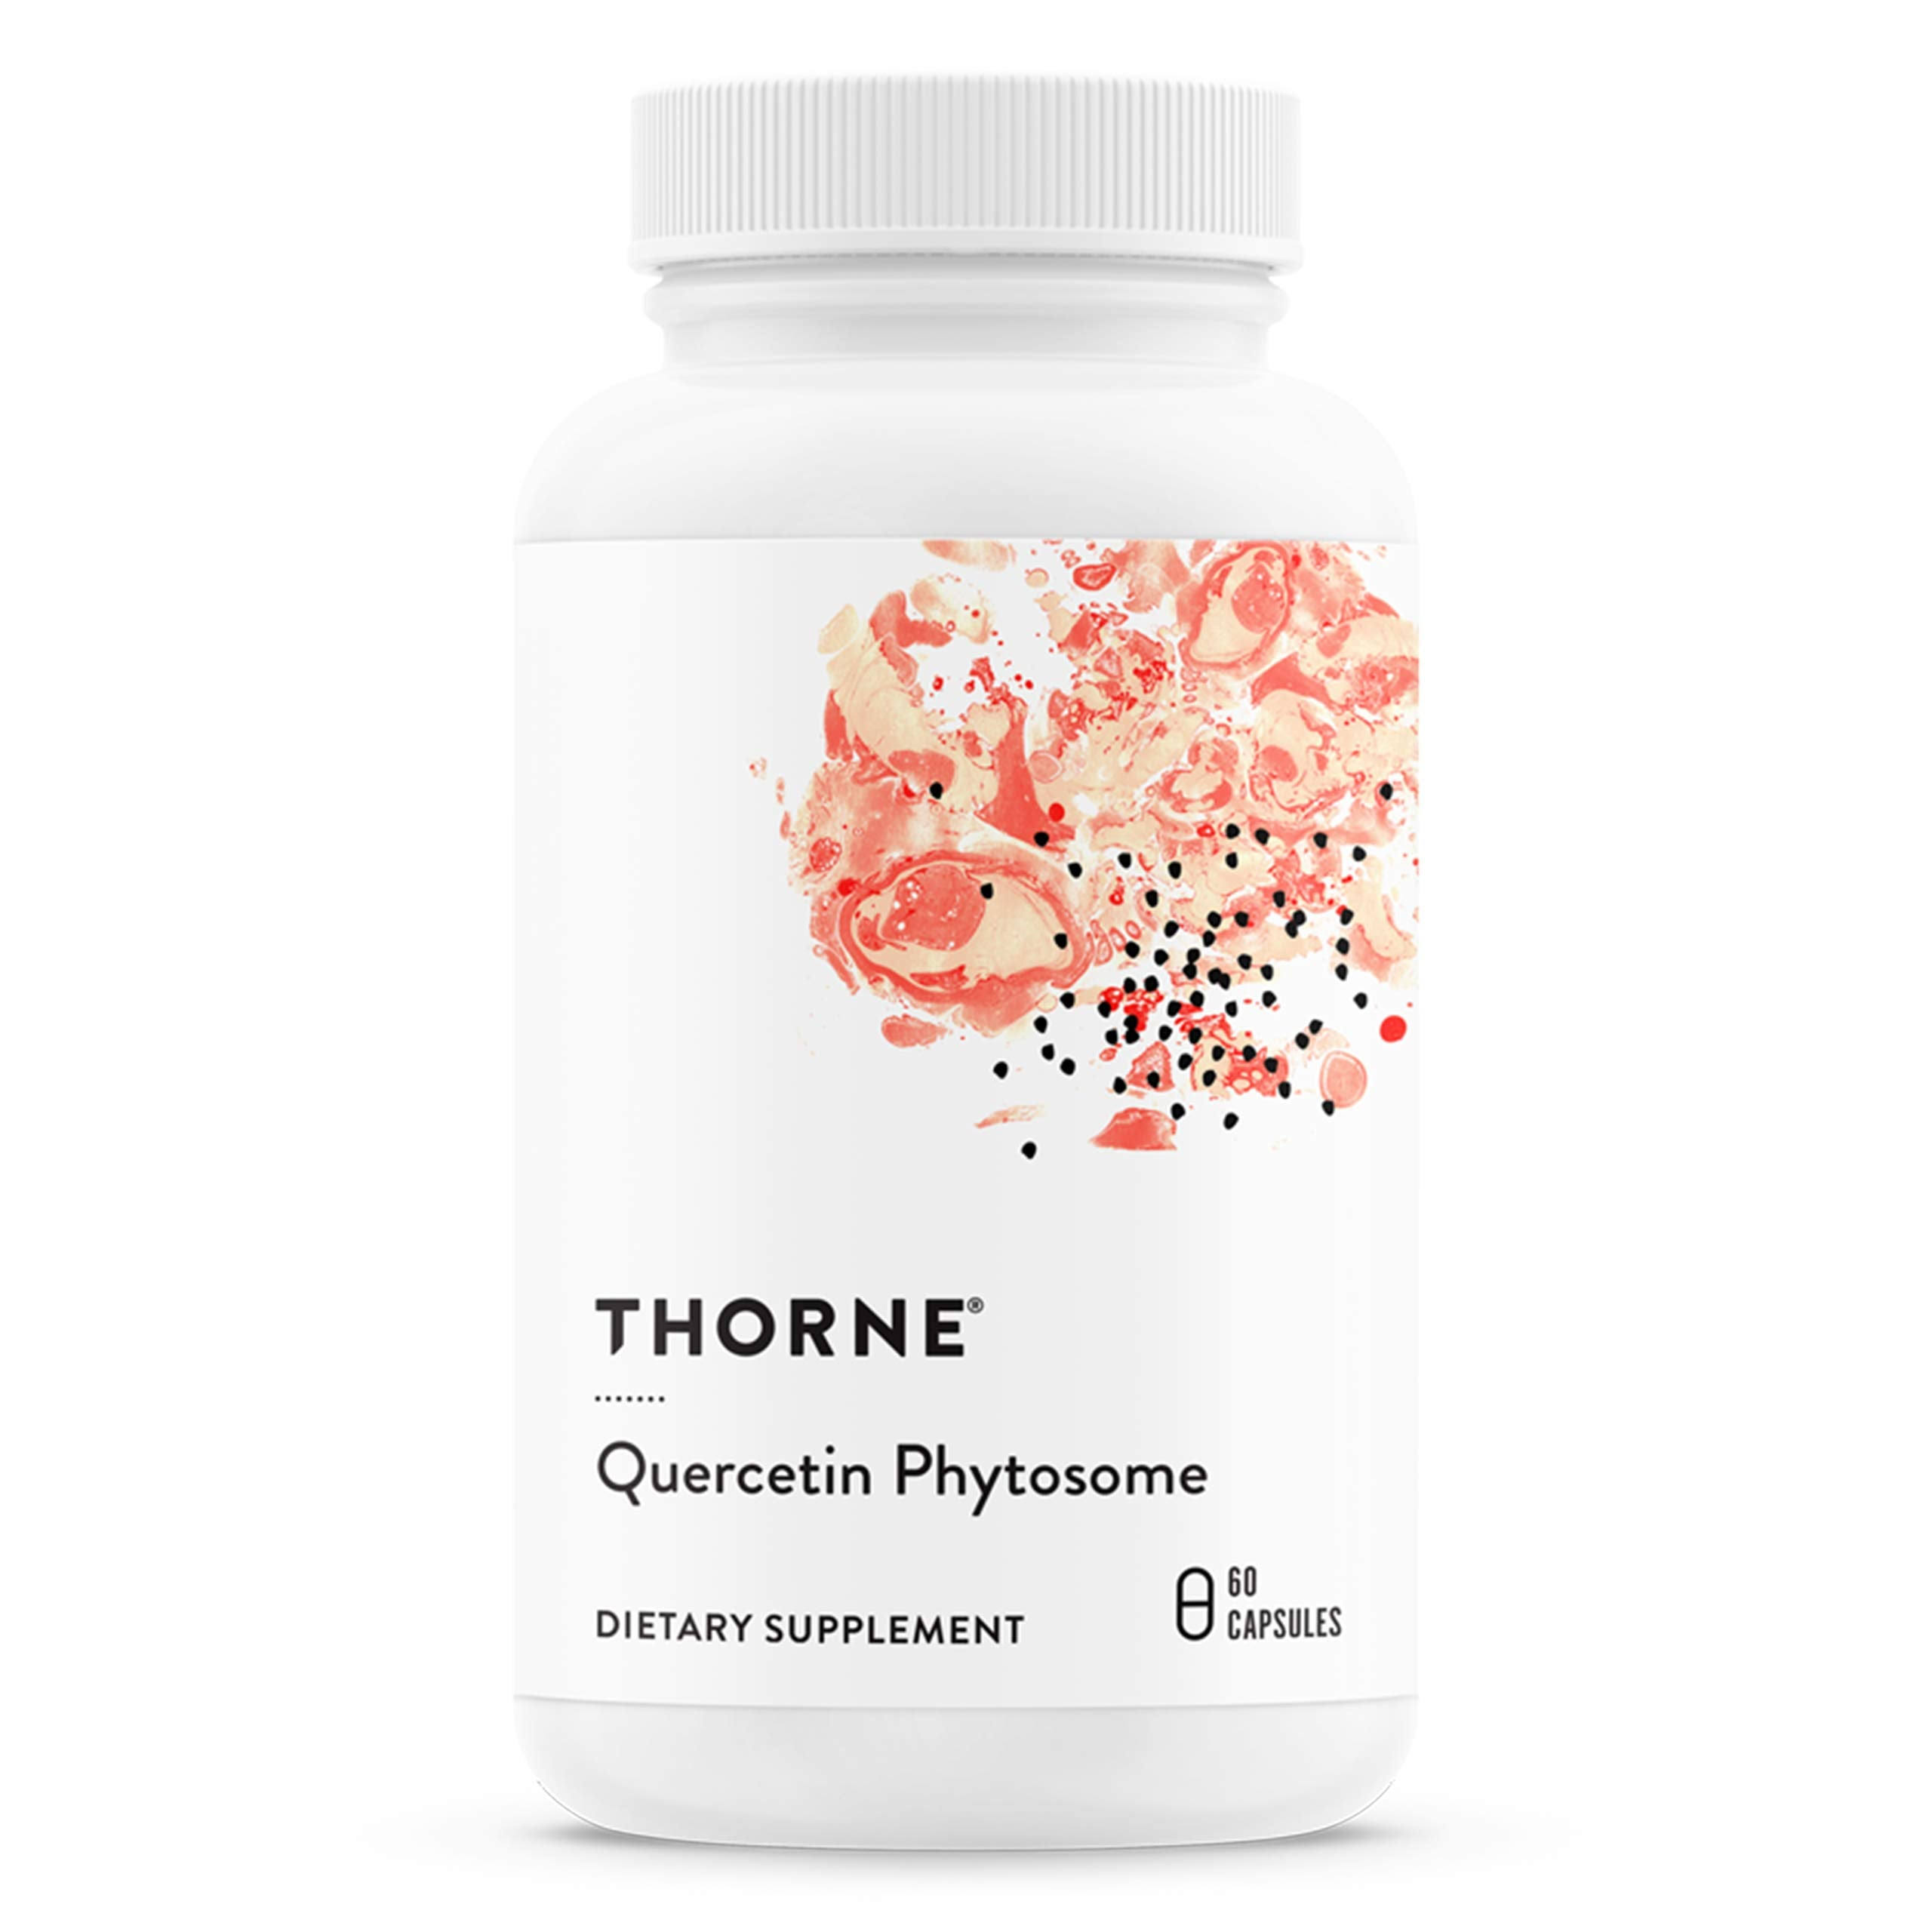 Thorne Research Quercetin Phytosome Supplements - 60ct